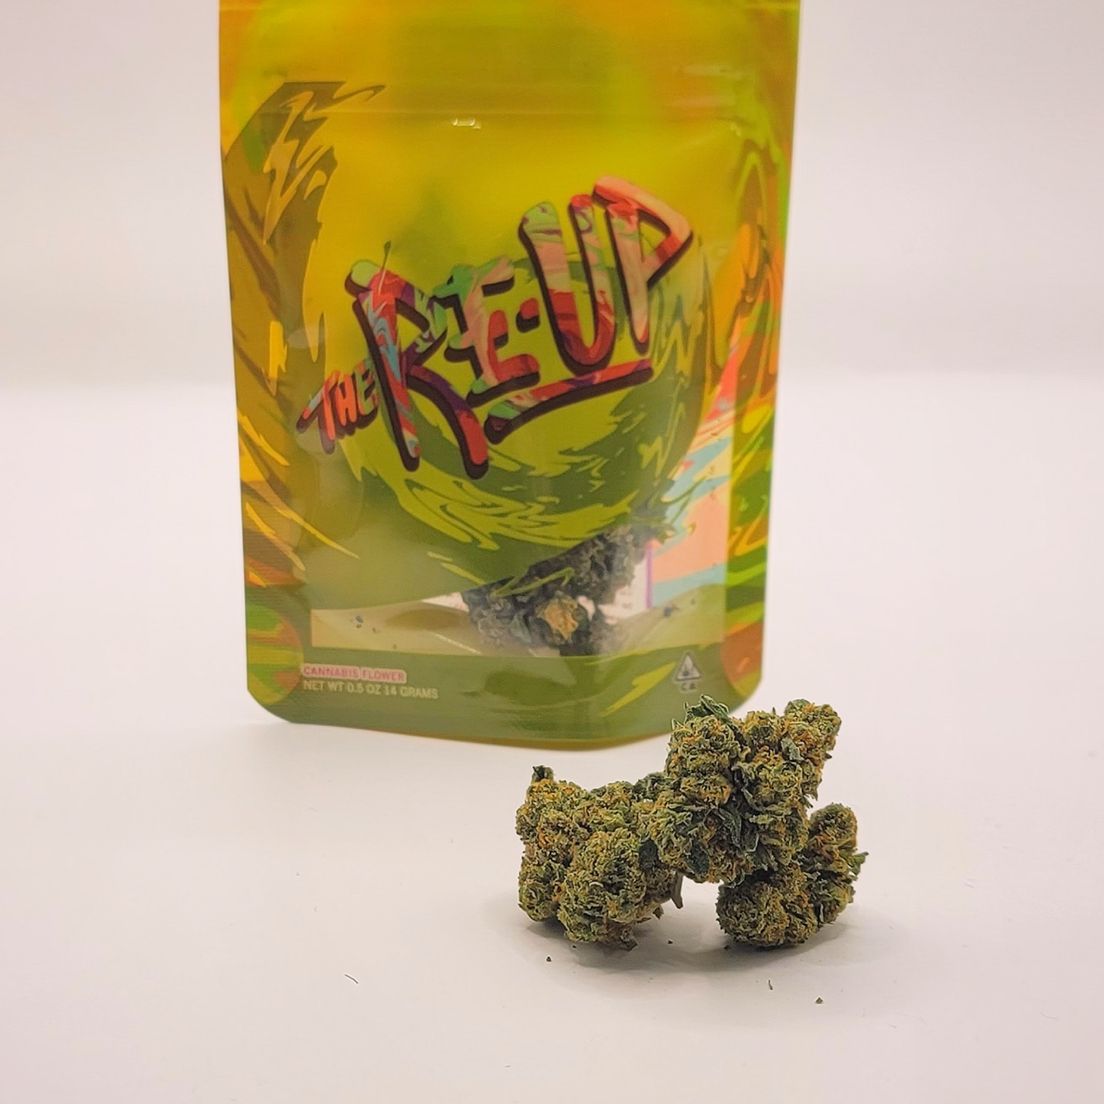 PRE-ORDER ONLY 1/8 Bacio 41 (30.52%/Indica) - The Re-Up